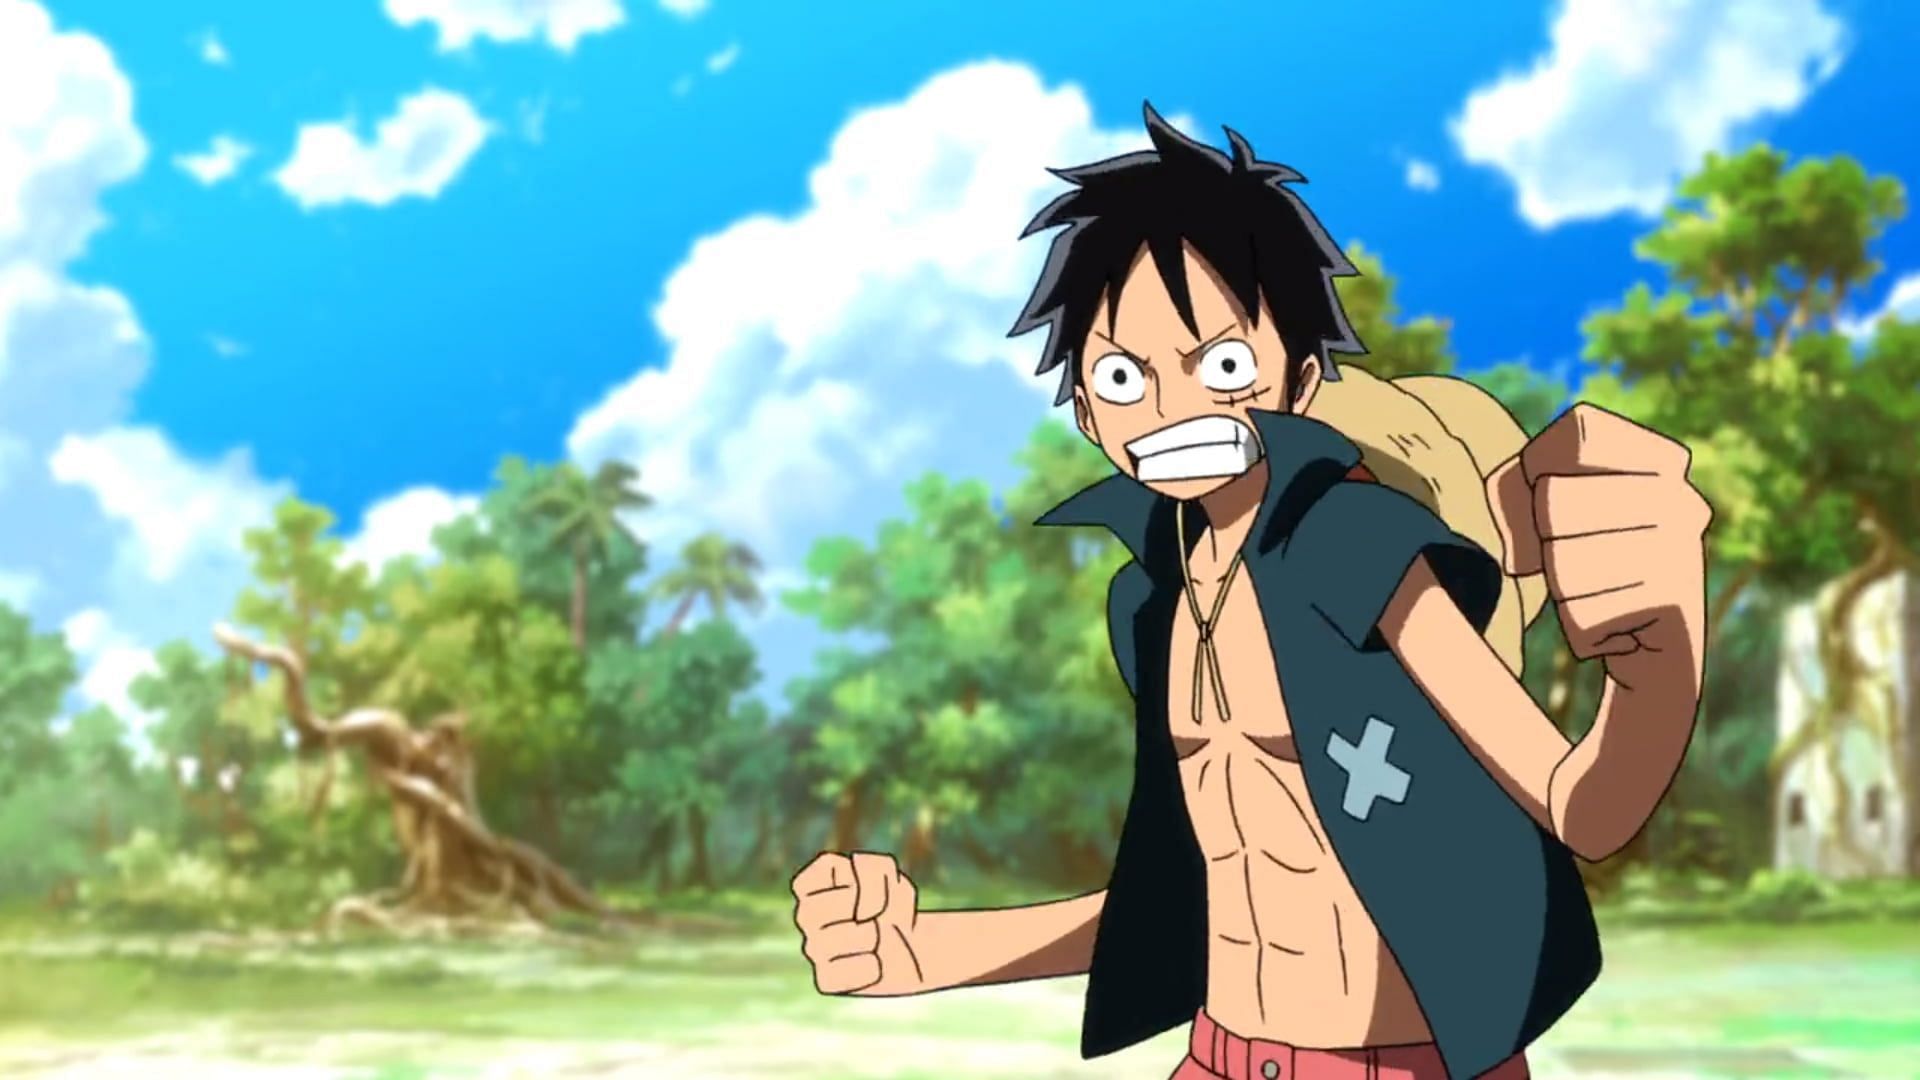 Monkey D. Luffy as shown in the One Piece anime series (Image via Toei Animations)